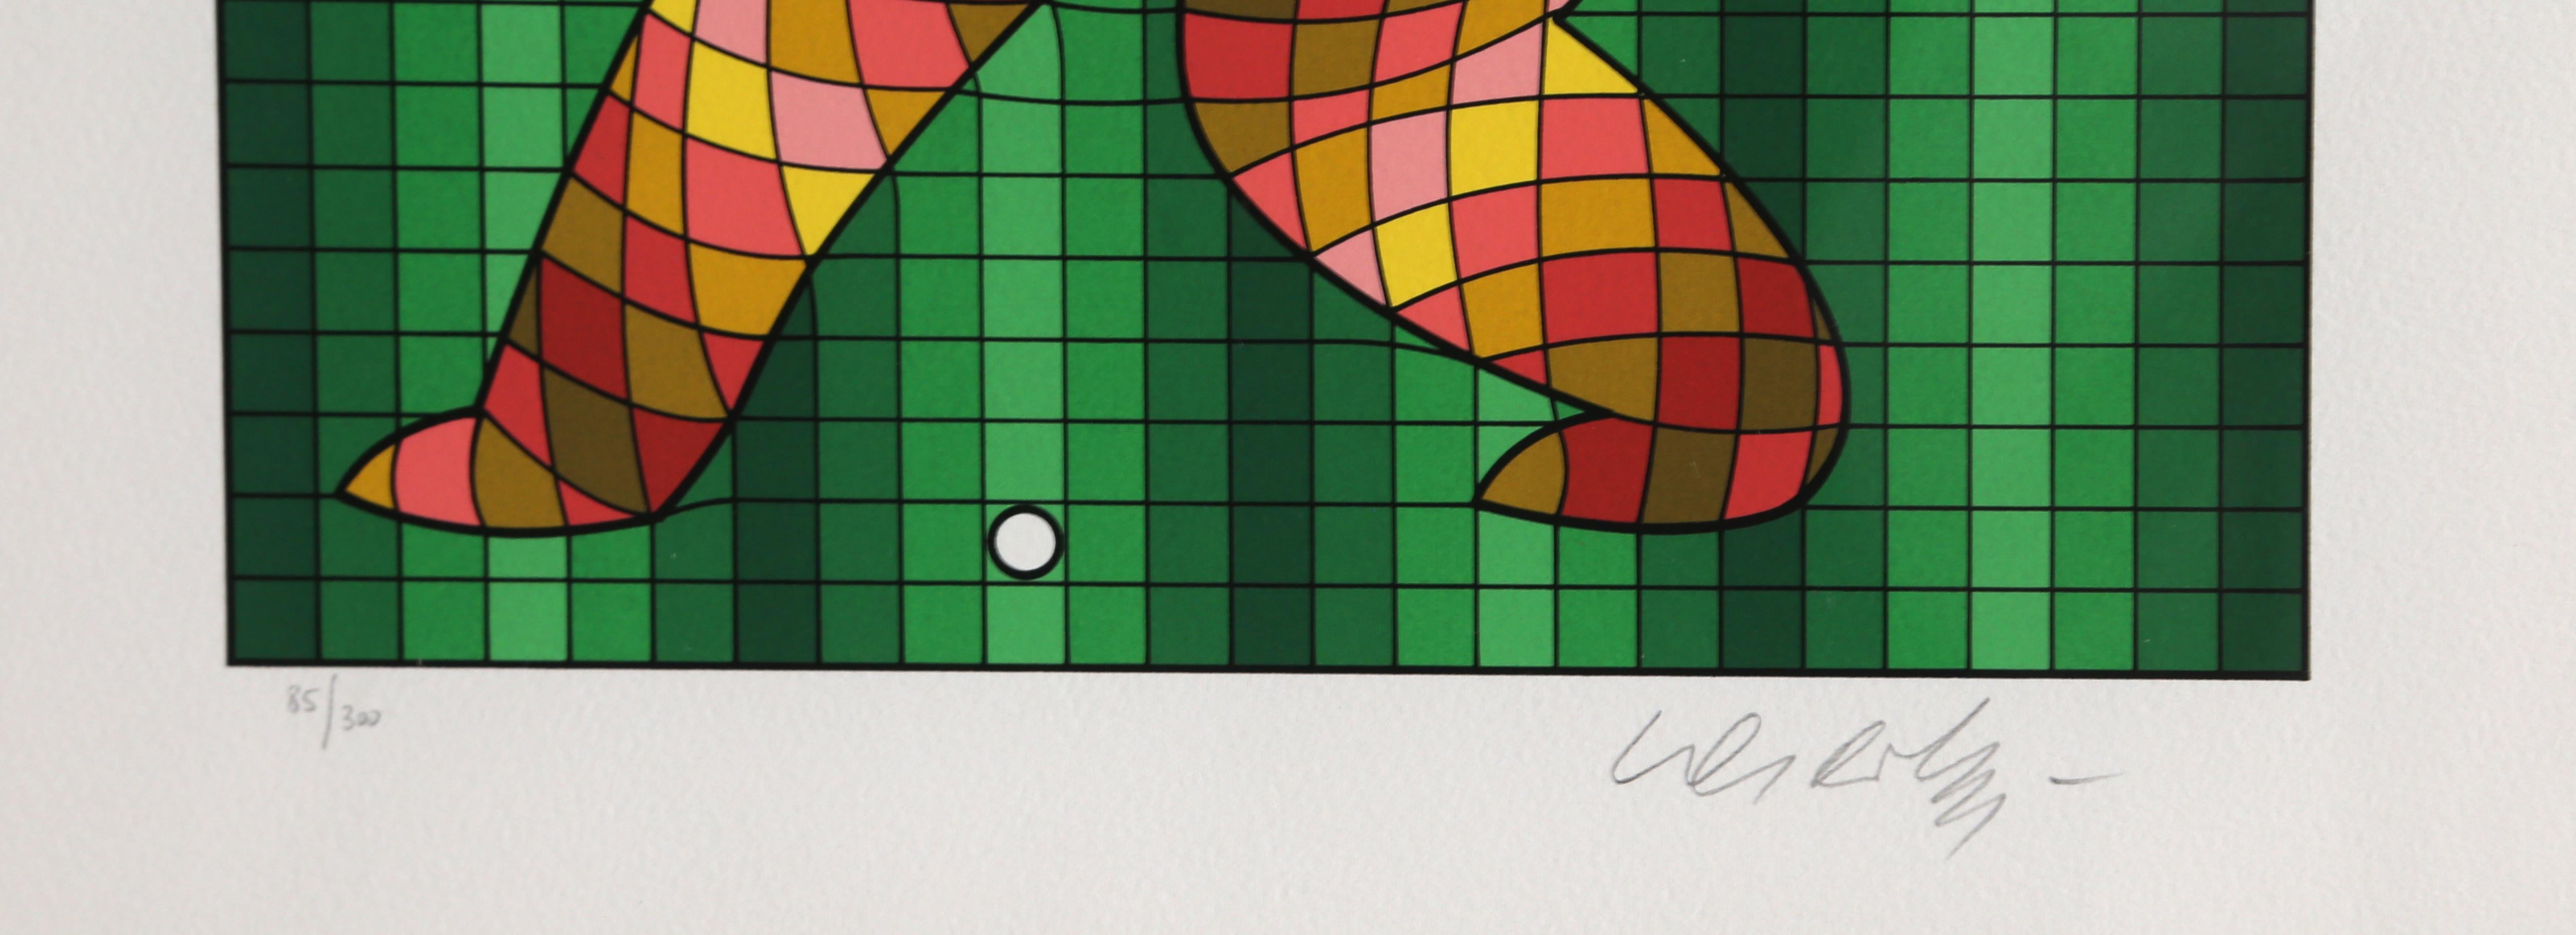 The Golfer, Framed Serigraph by Vasarely - Op Art Print by Victor Vasarely